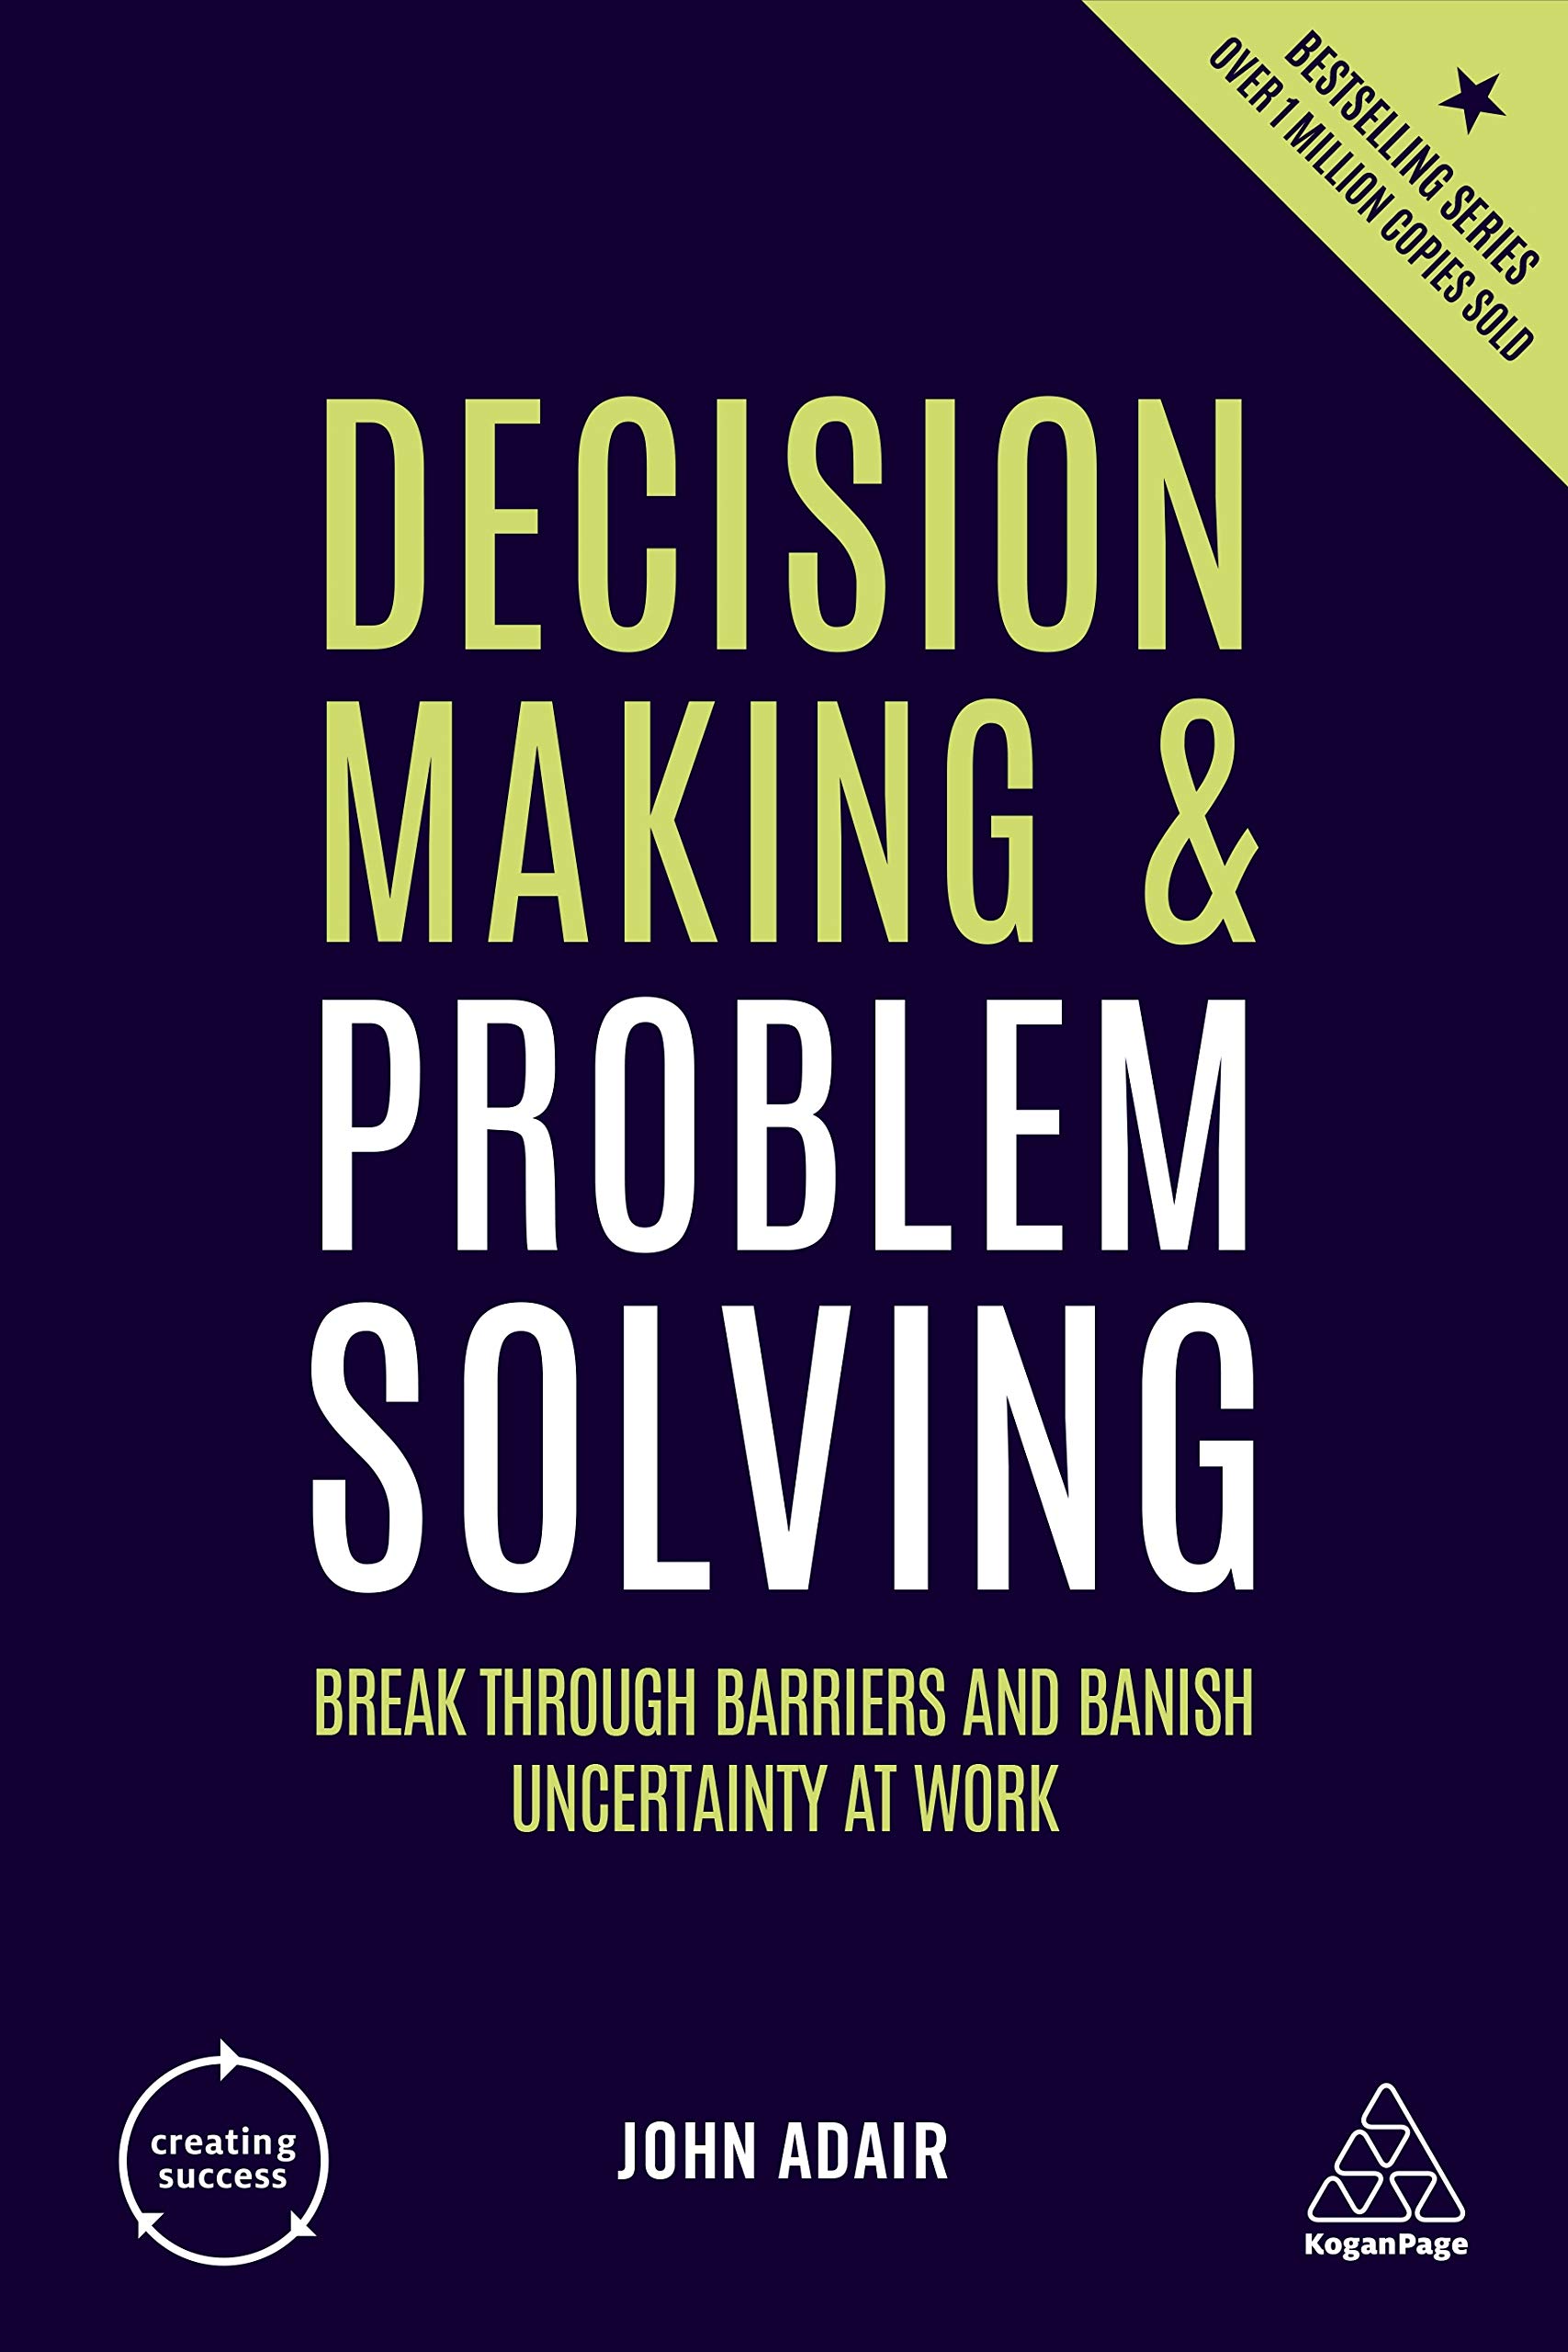 leadership problem solving and decision making